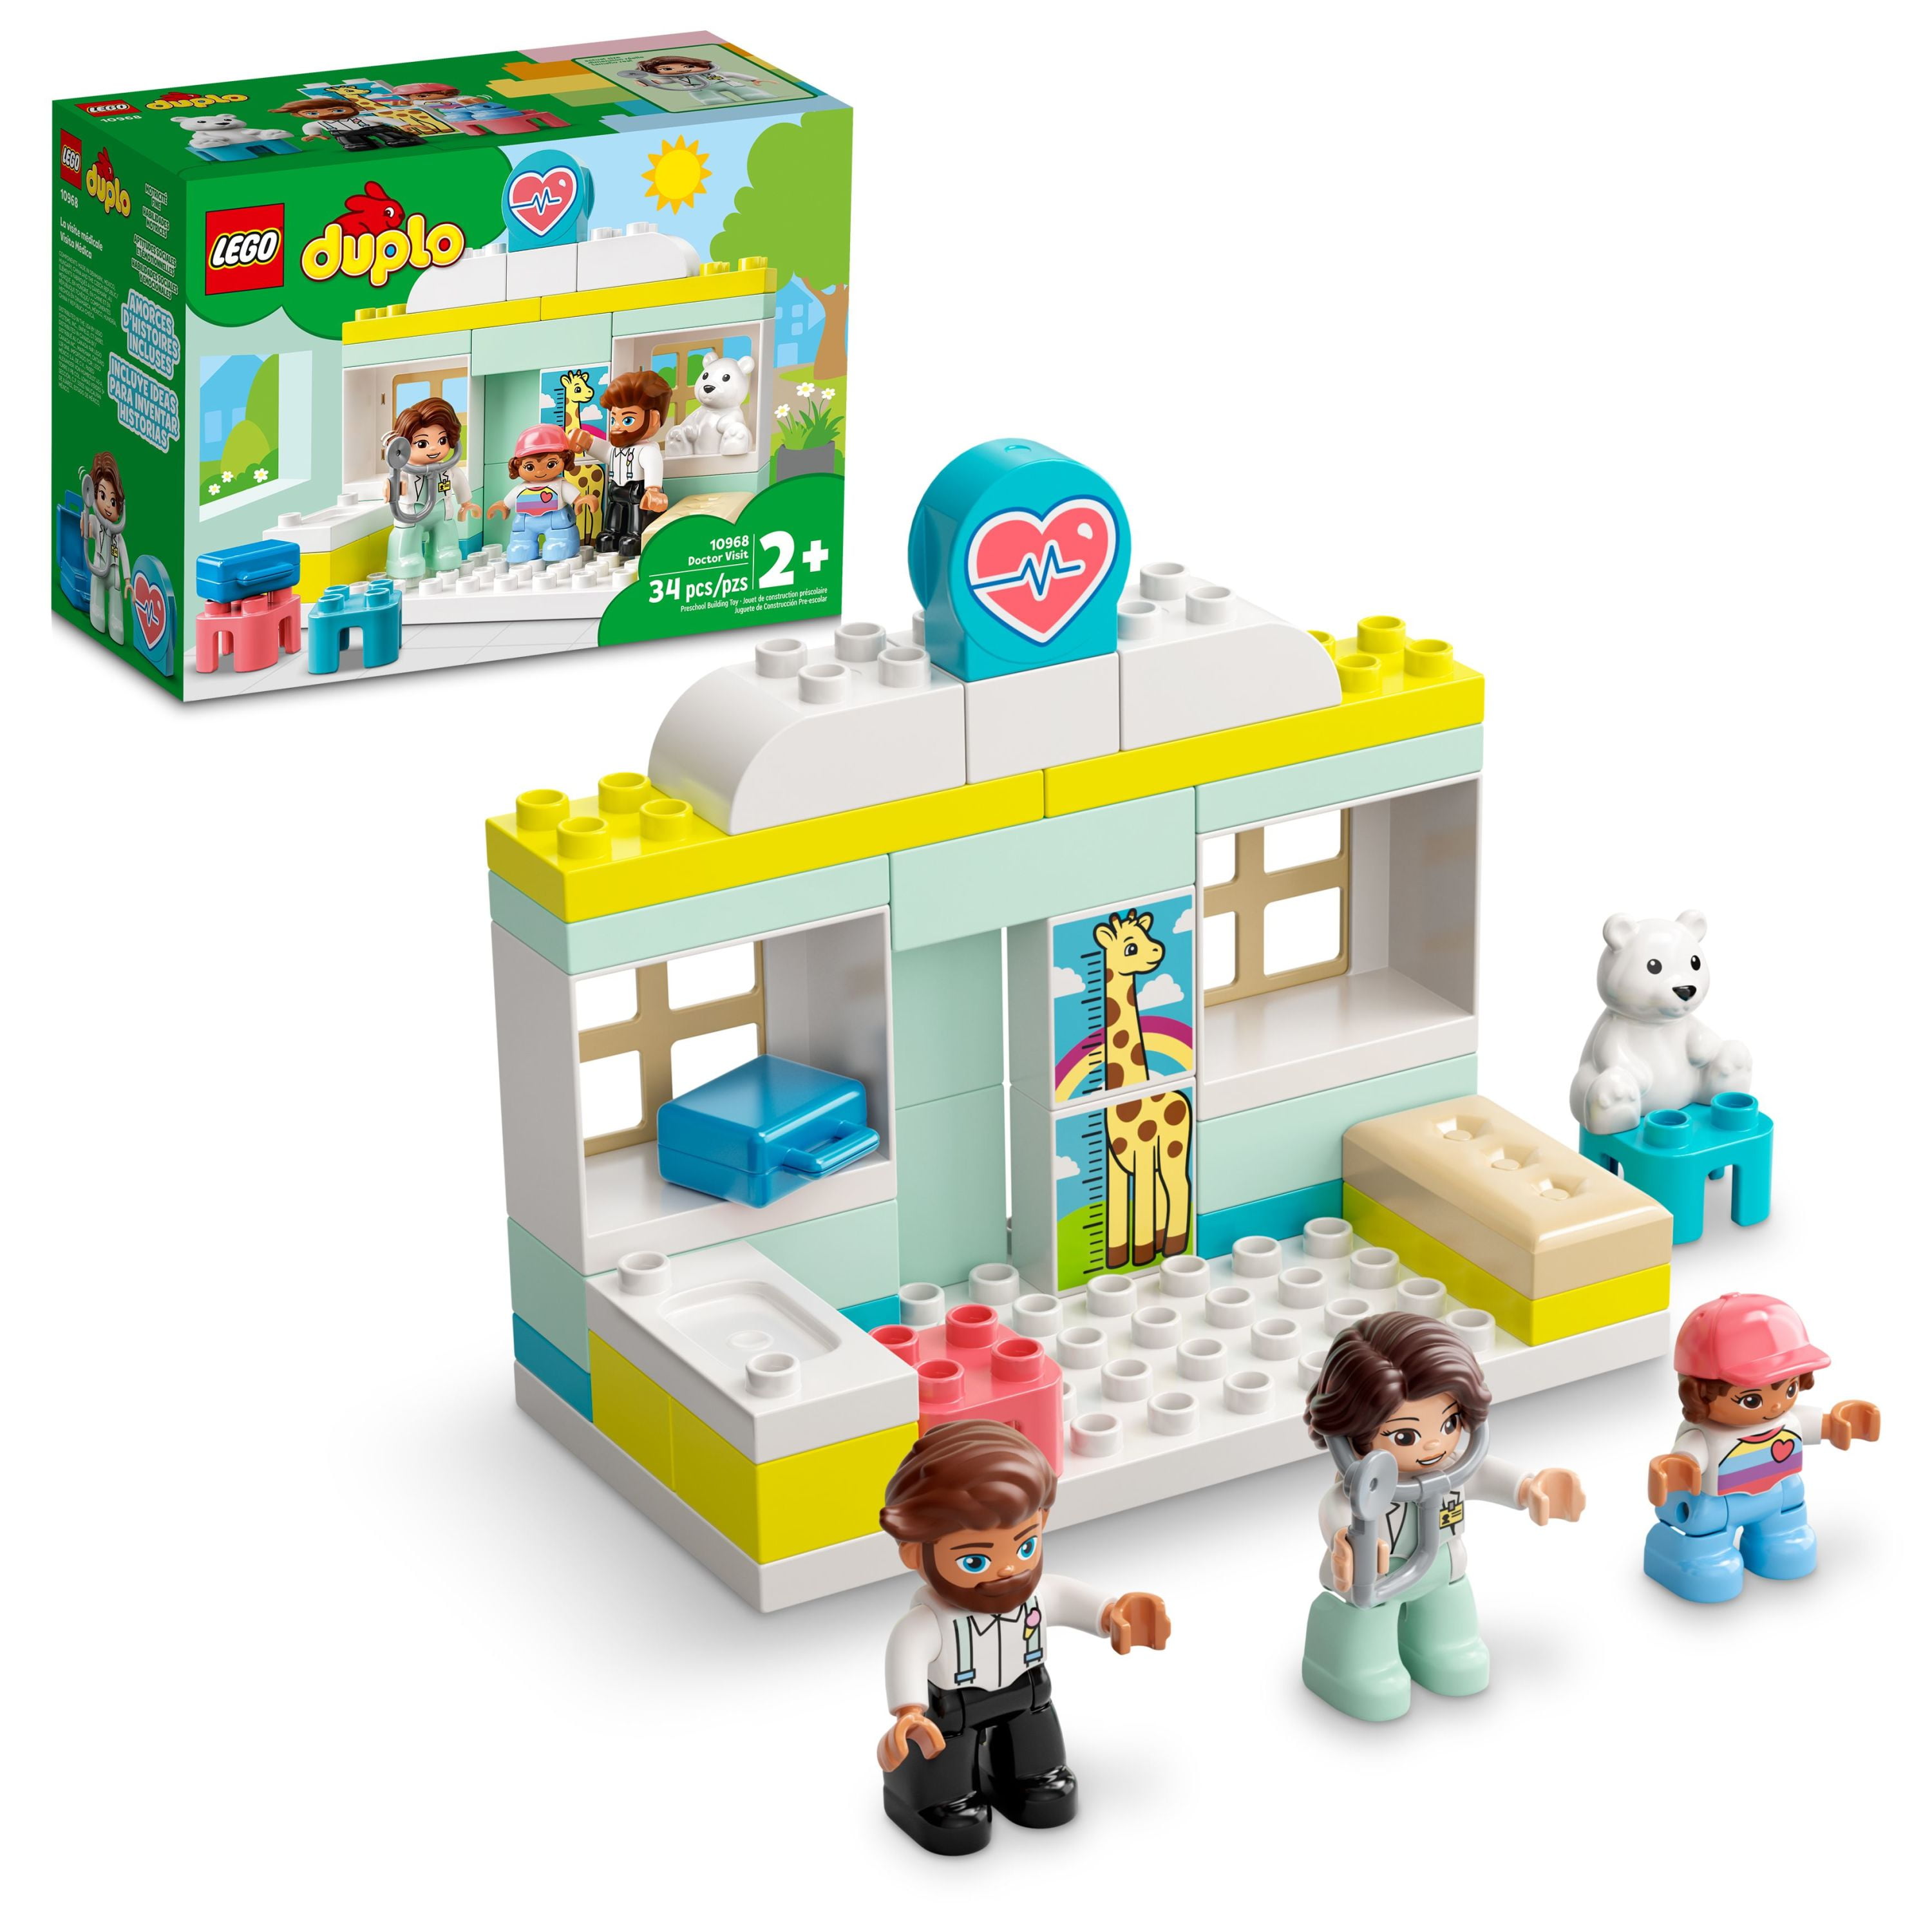 pubertet Vant til Tåler LEGO DUPLO Doctor Visit 10968 - Large Bricks Building Set, Educational  Early Learning Toy, Includes Doctor, Father, and Child Figures, Great  Development Gift for Toddlers, Girls, and Boys 2+ Years Old - Walmart.com